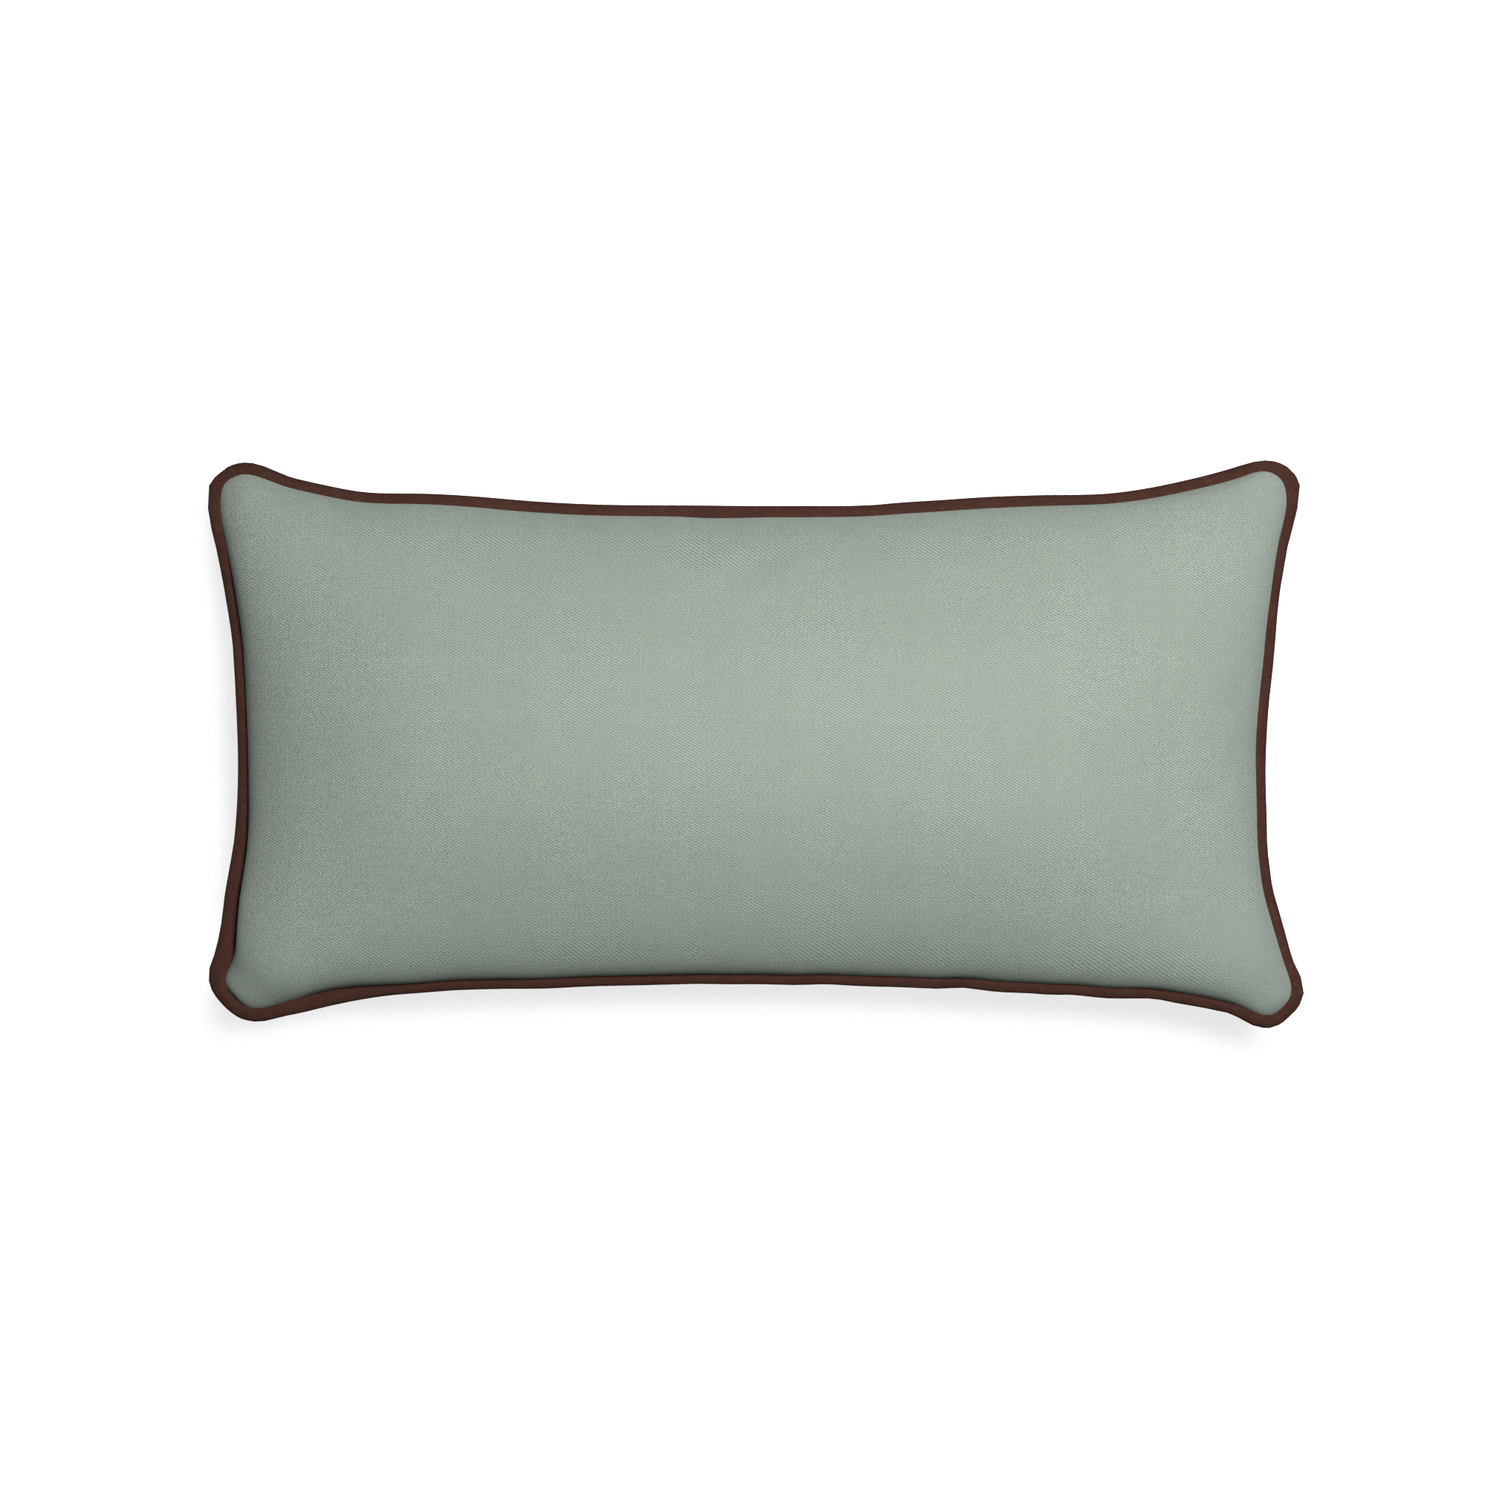 Midi-lumbar sage custom sage green cottonpillow with w piping on white background